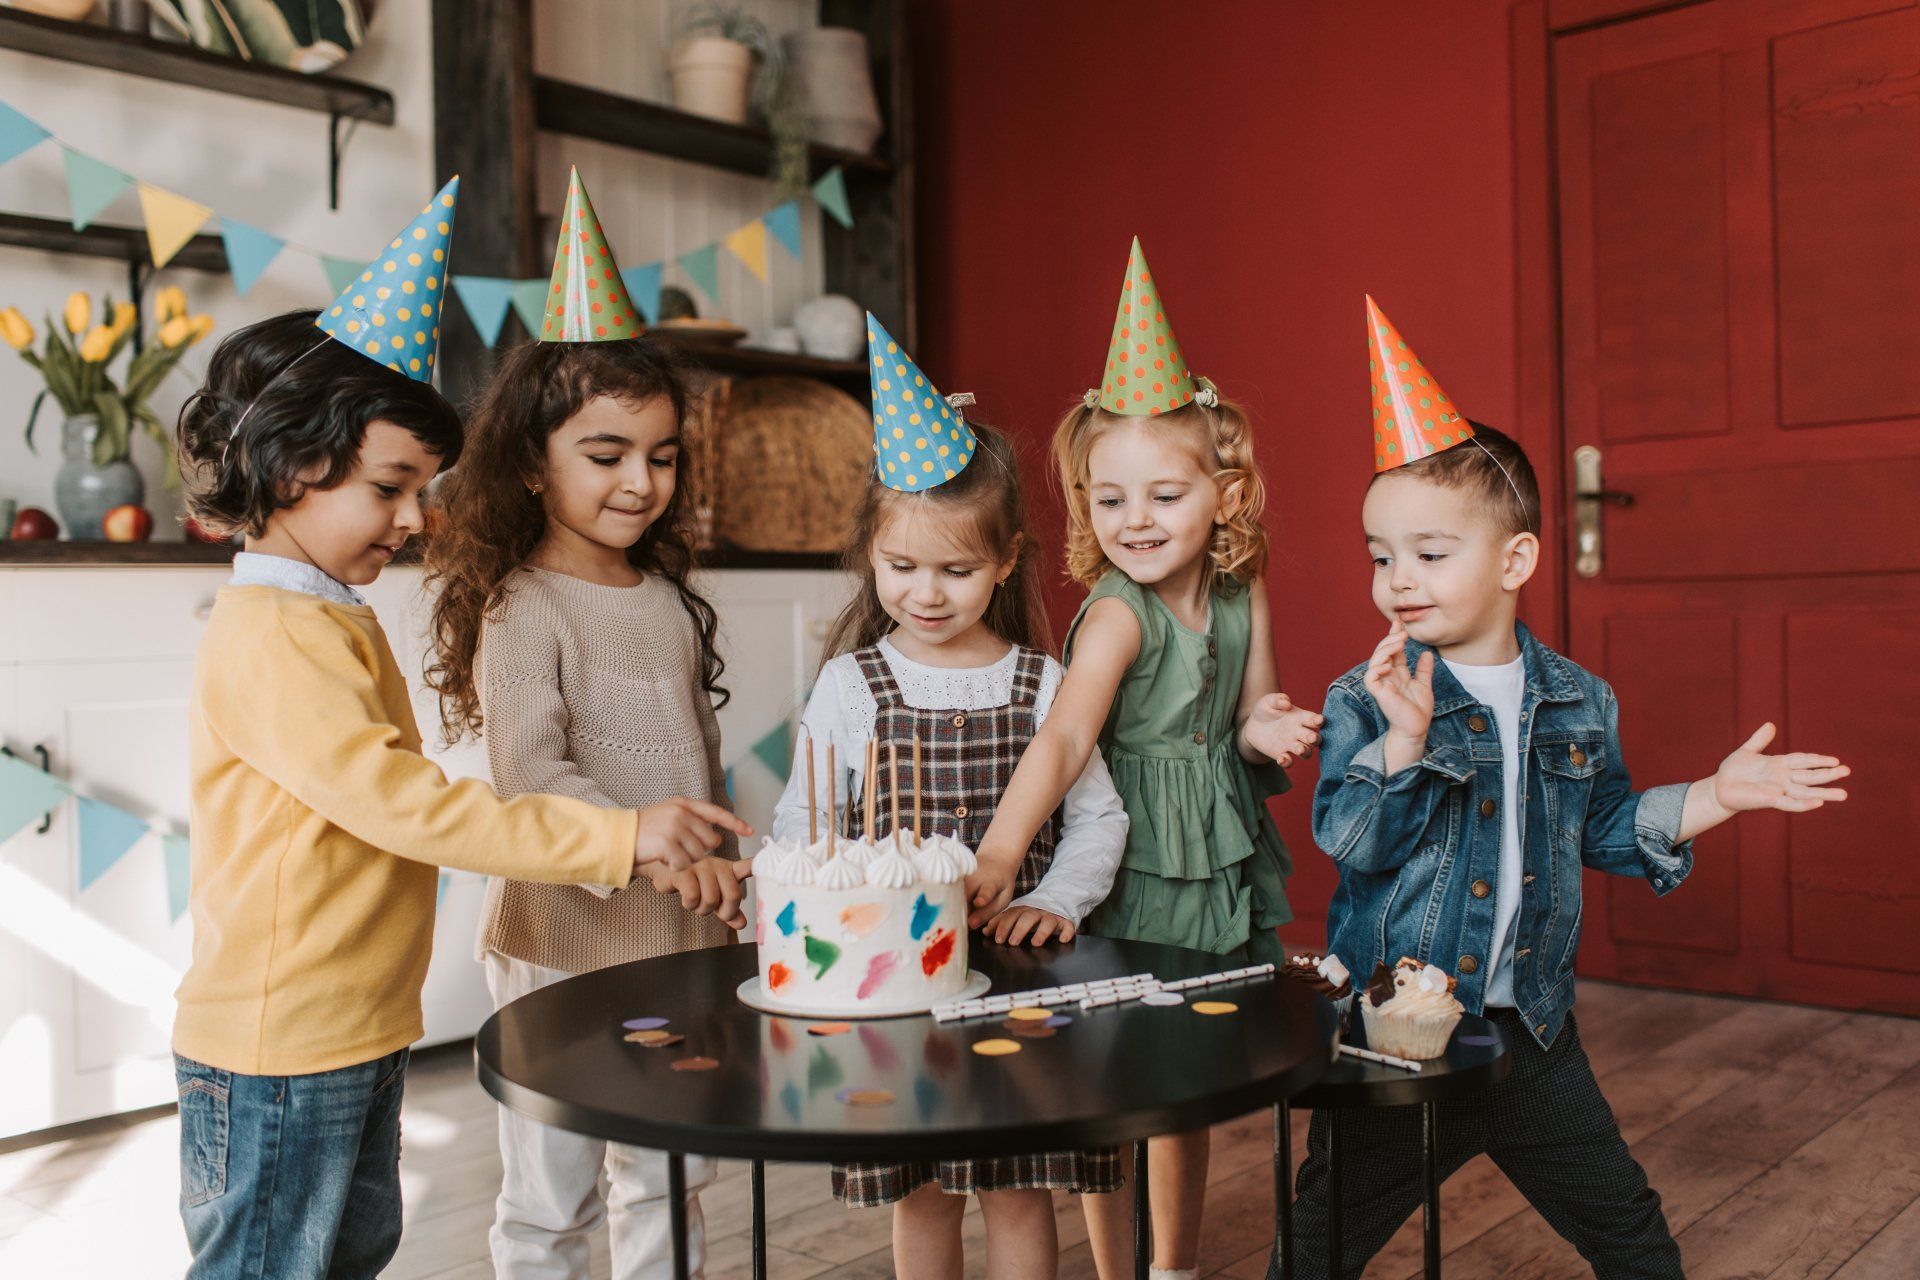 A group of children are standing around a table with a birthday cake.